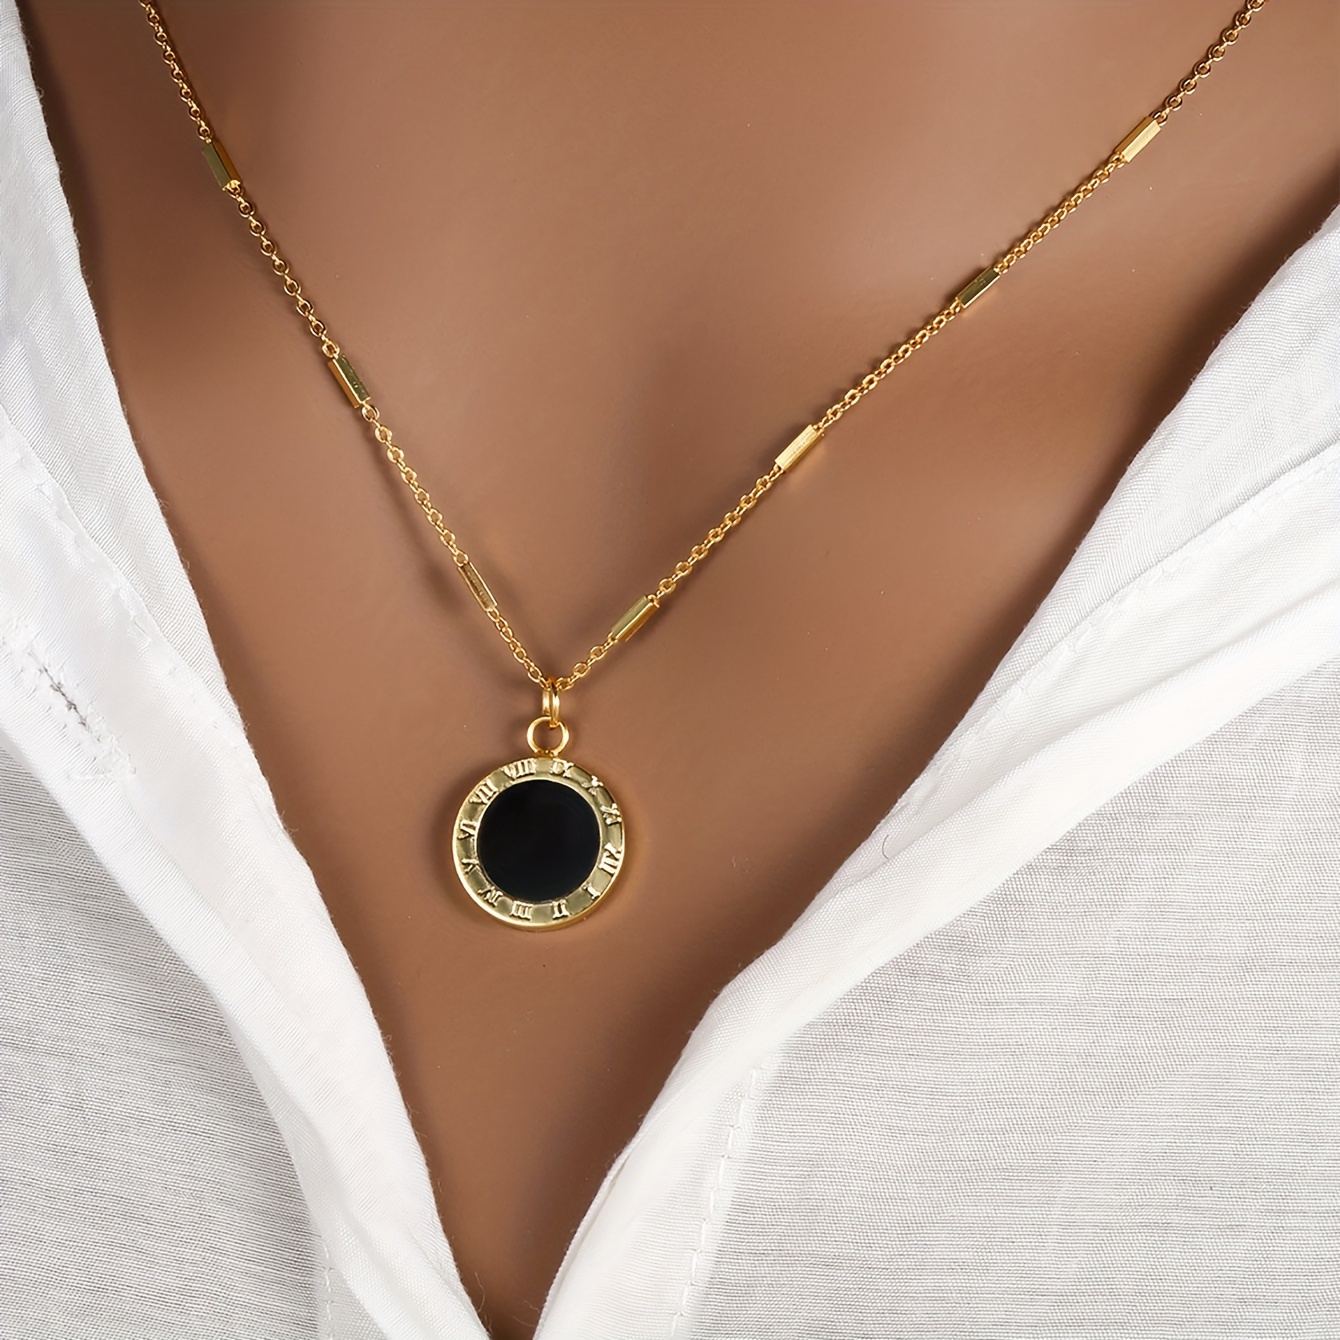 

Minimalist Retro Style Black Round Pendant Necklace With 18k Gold Plated Roman Numerals Pendant Necklace Clavicle Chain Jewelry For Women